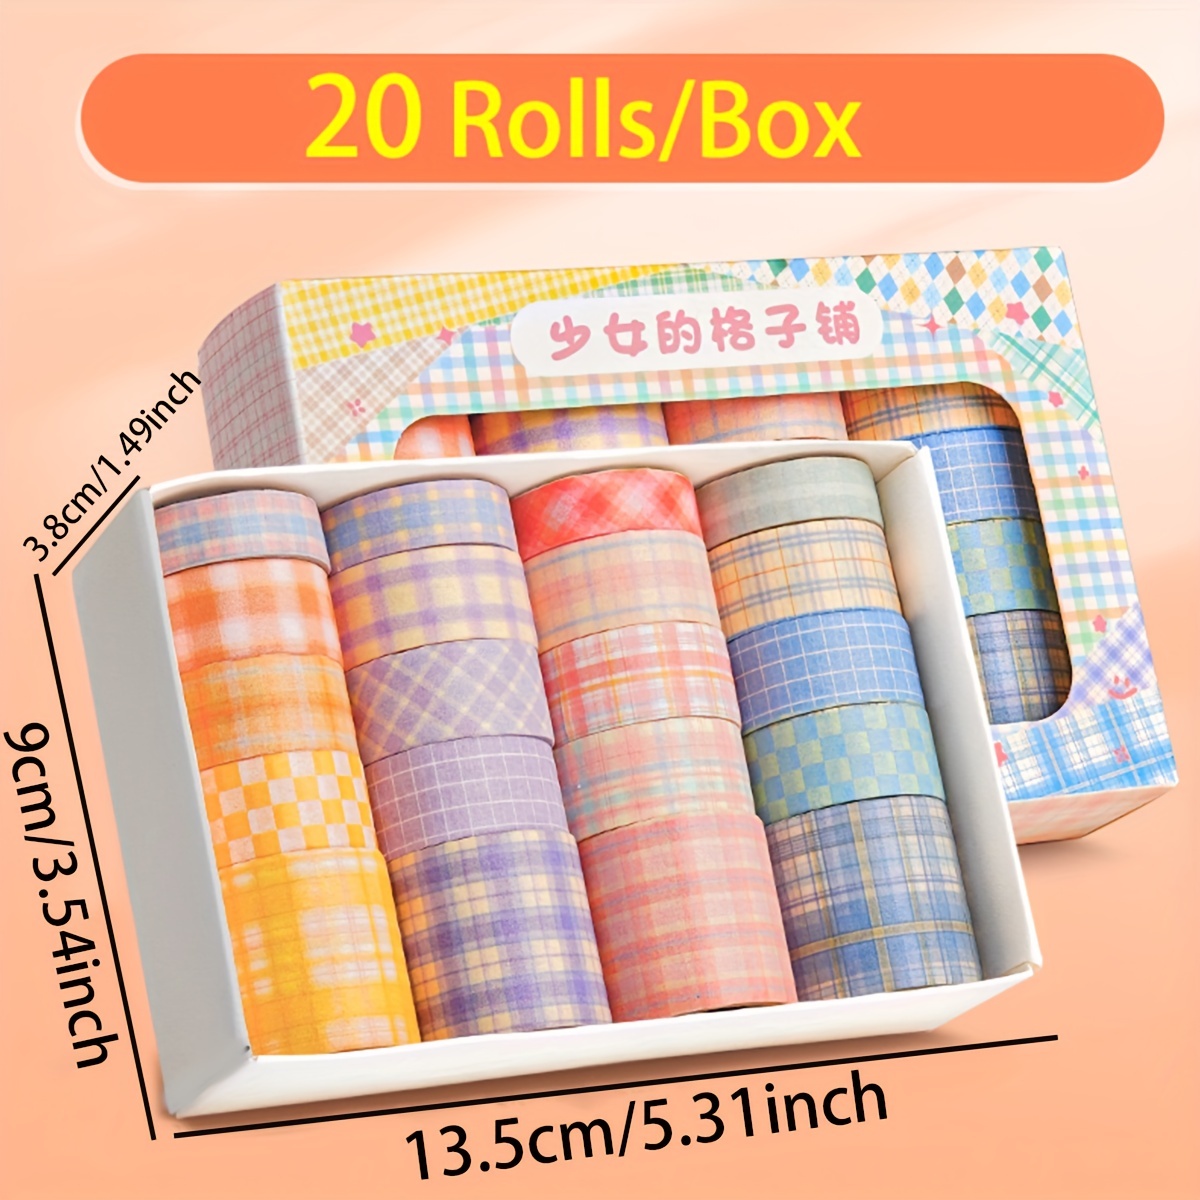 10 Rolls/box 0.28inch Wide Tearable Rainbow Color Series Washi Tape Masking  Tape Handmade Decorative DIY Materials Colored Washi Tape Set / 10rolls Bo